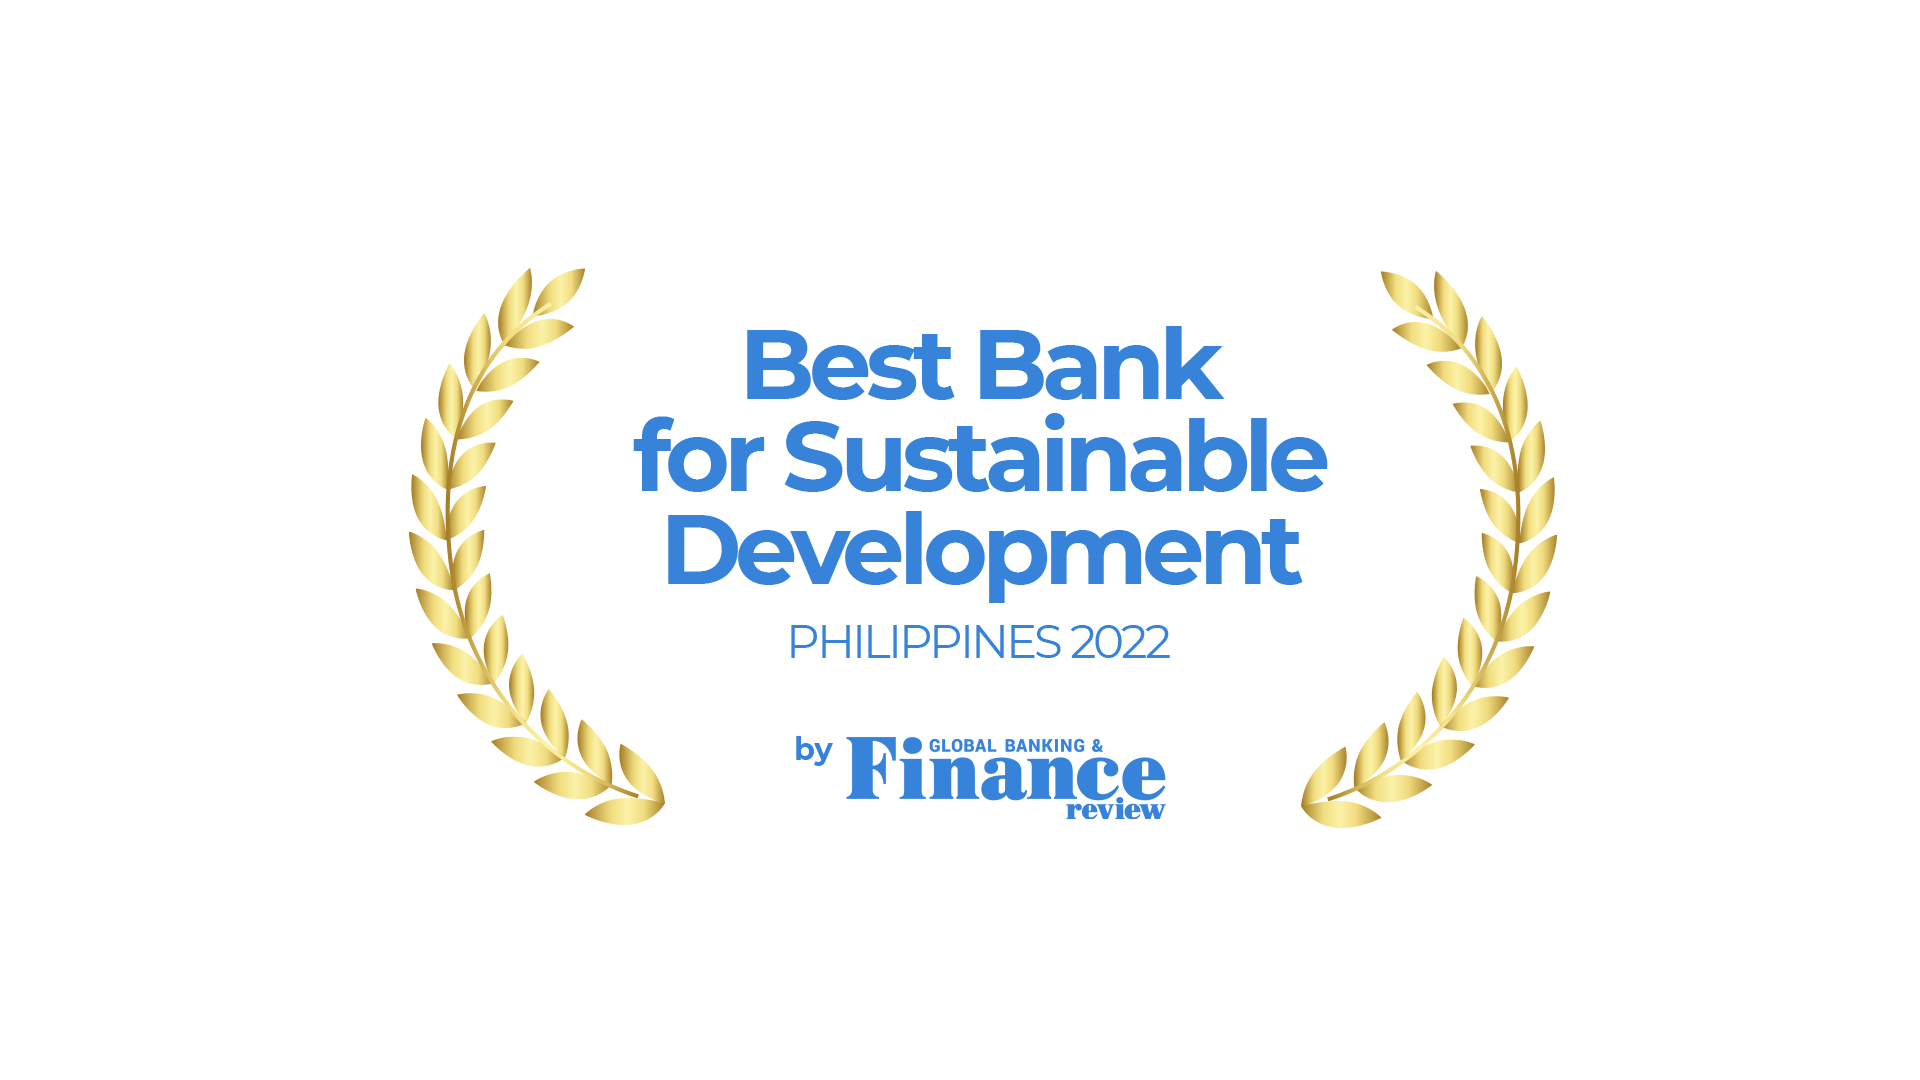 Best Bank for Sustainable Development